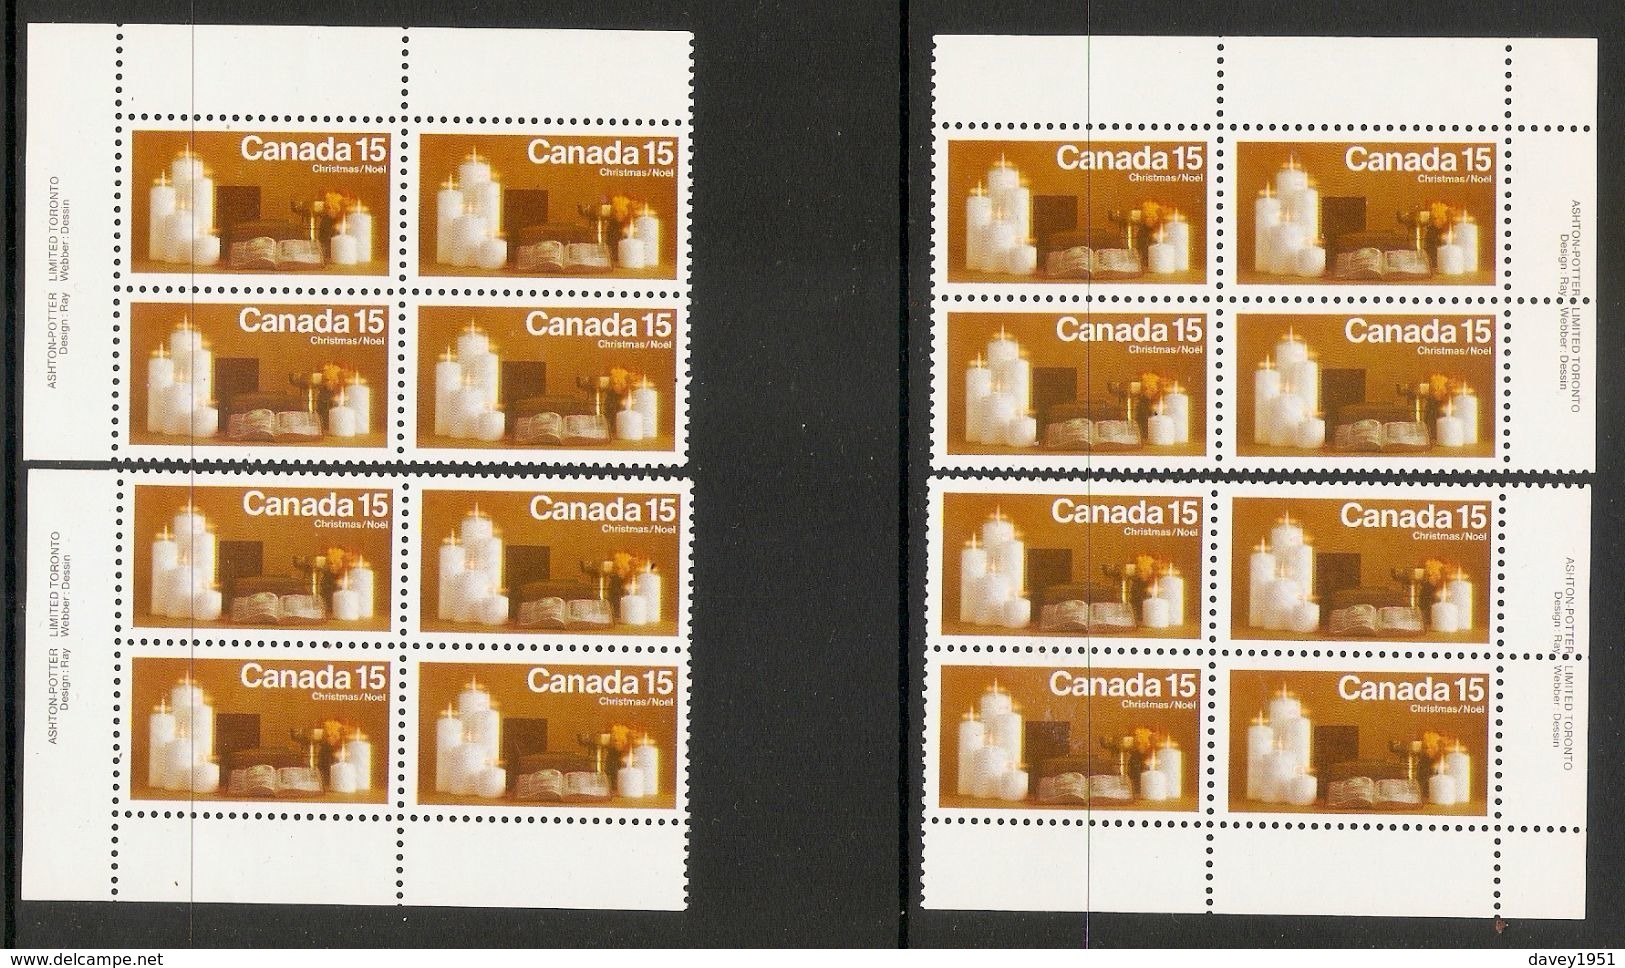 001496 Canada 1972 Christmas Set Of Plate Blocks MNH (4 Scans) - Plate Number & Inscriptions